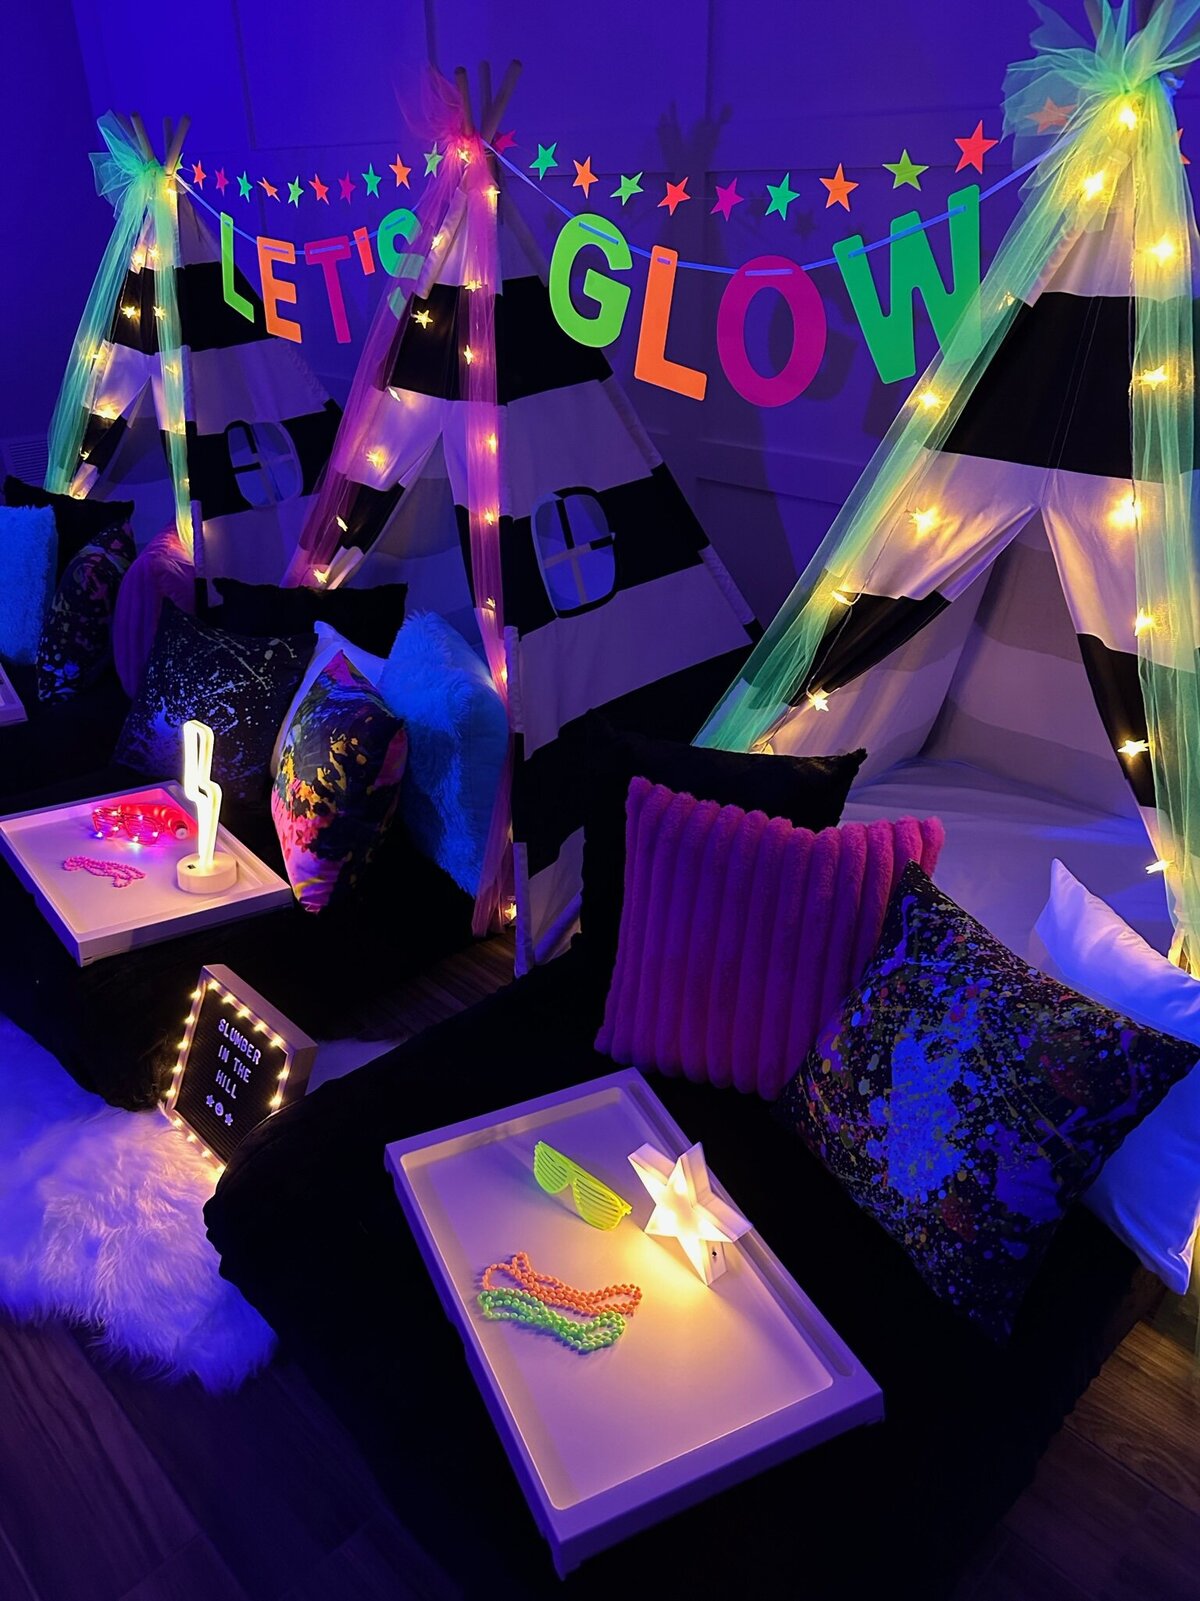 glow in the dark slumber party decor with teepee beds